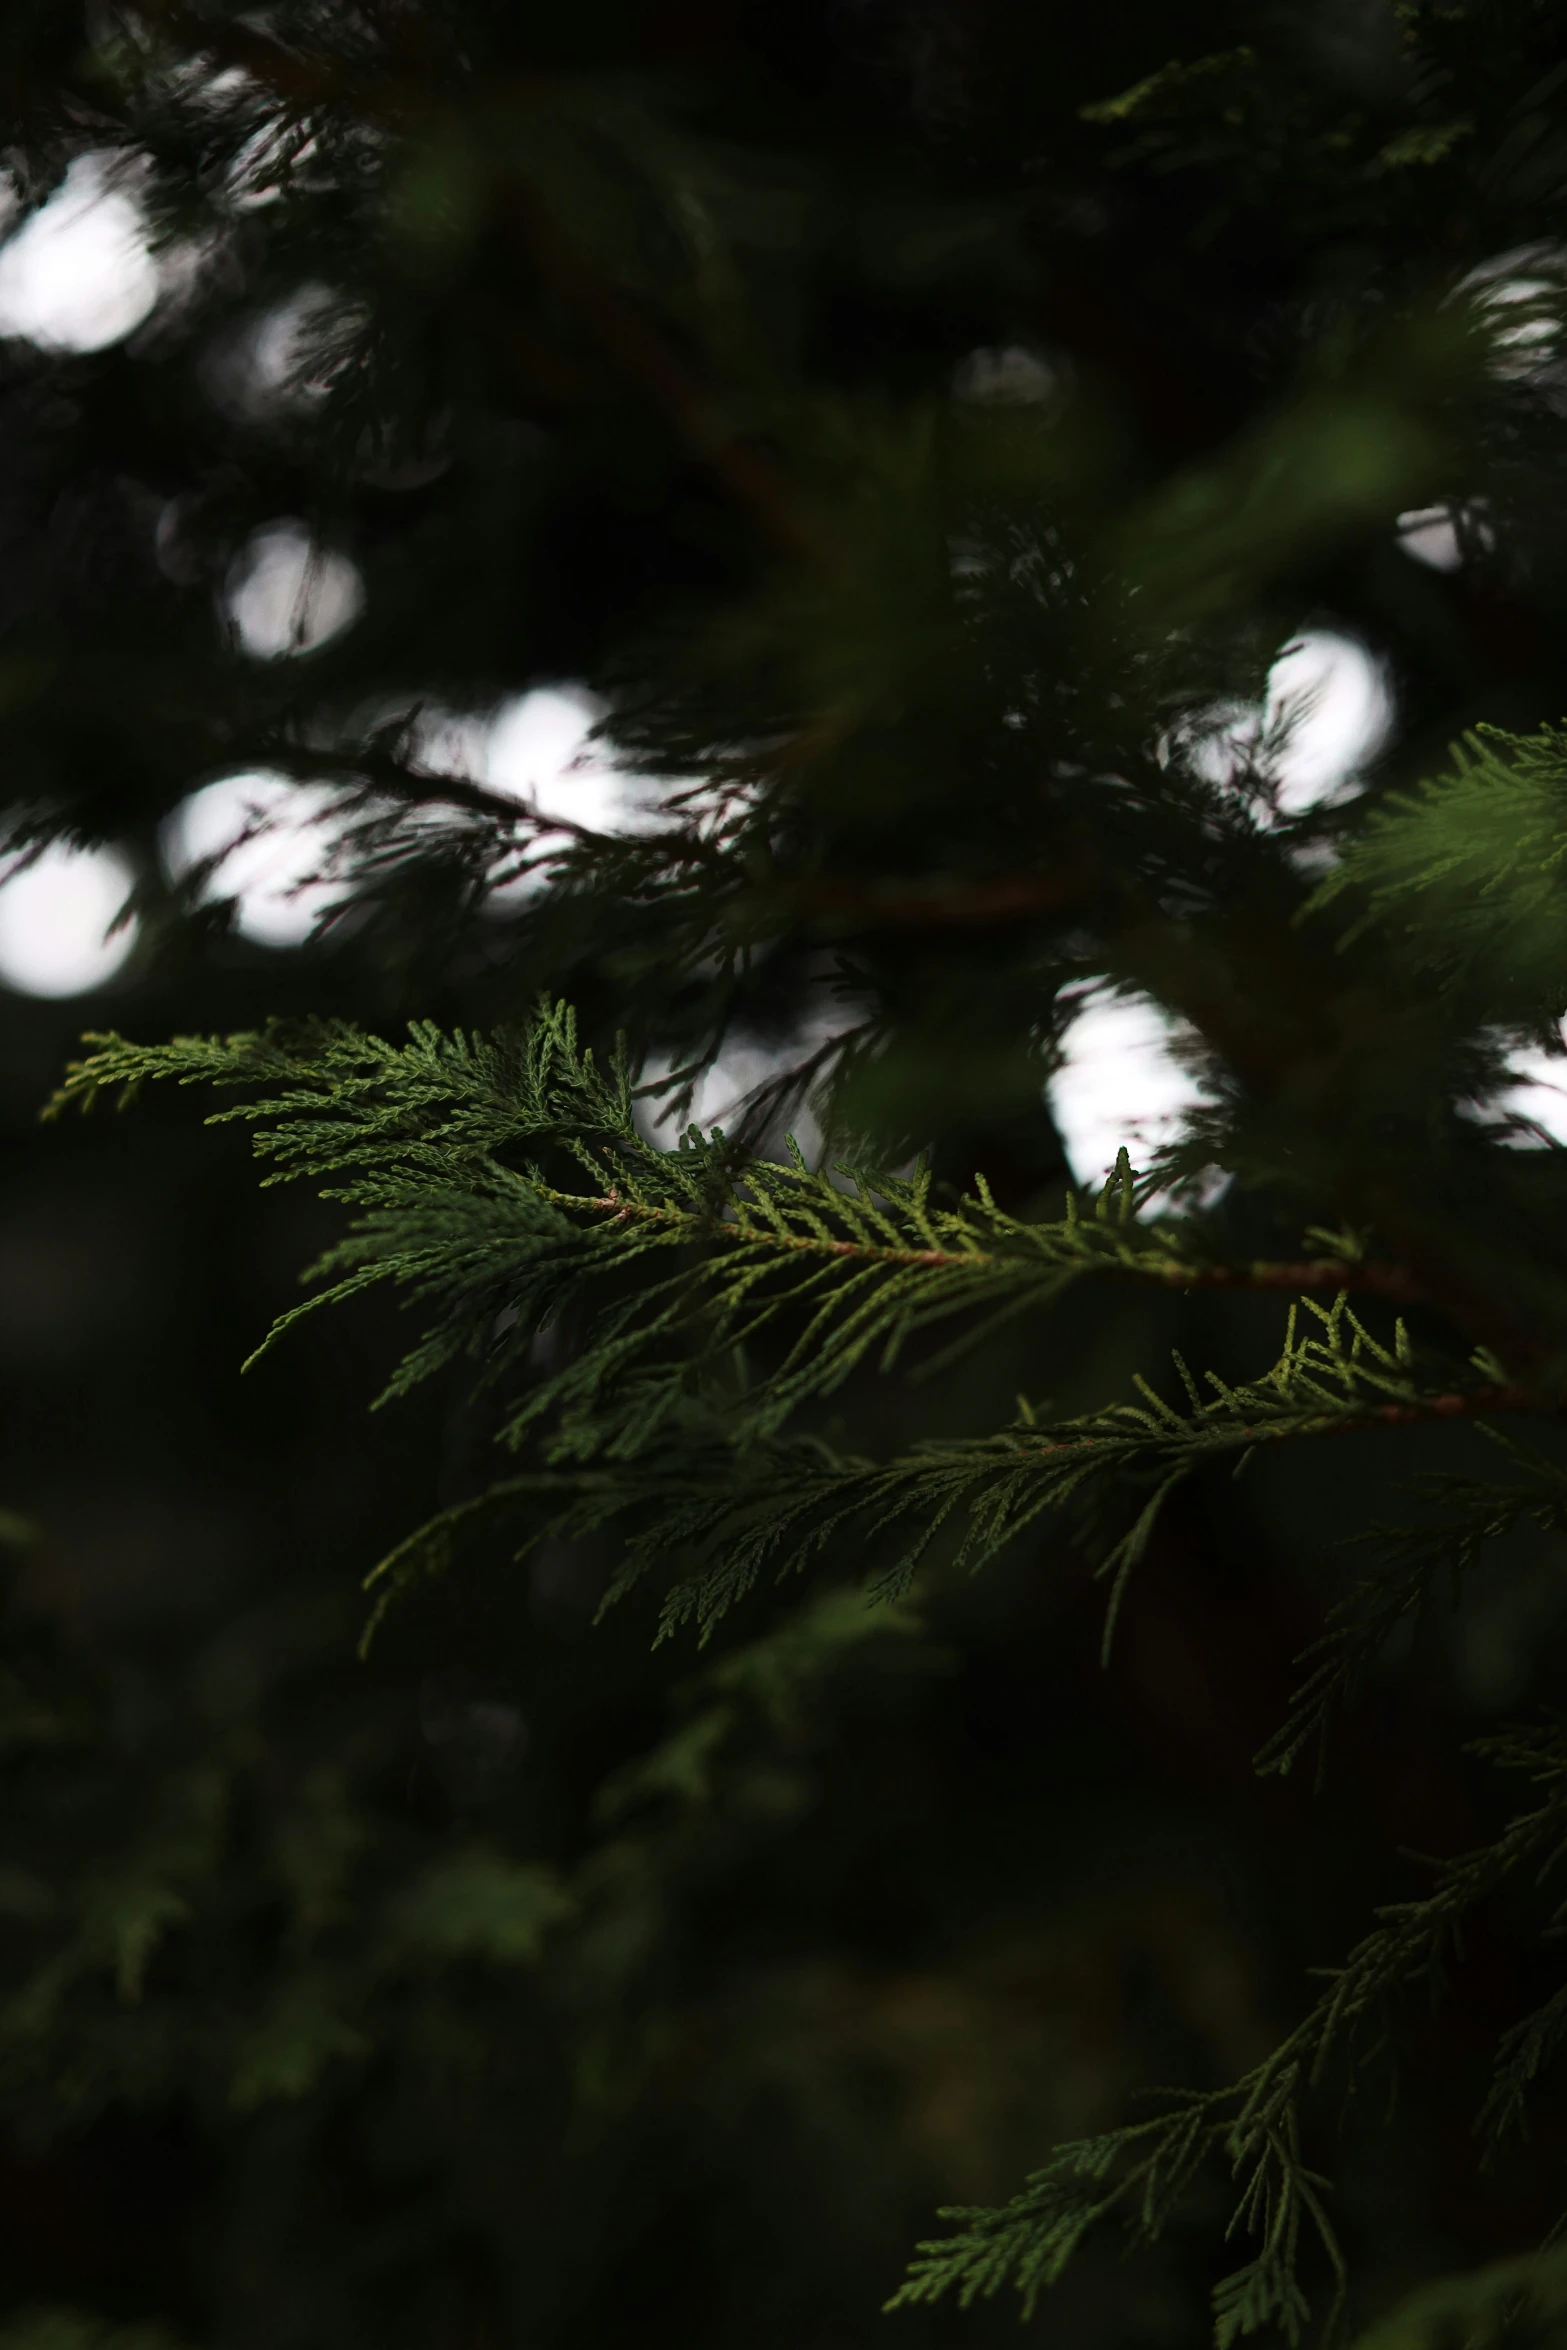 some green nches on top of a pine tree